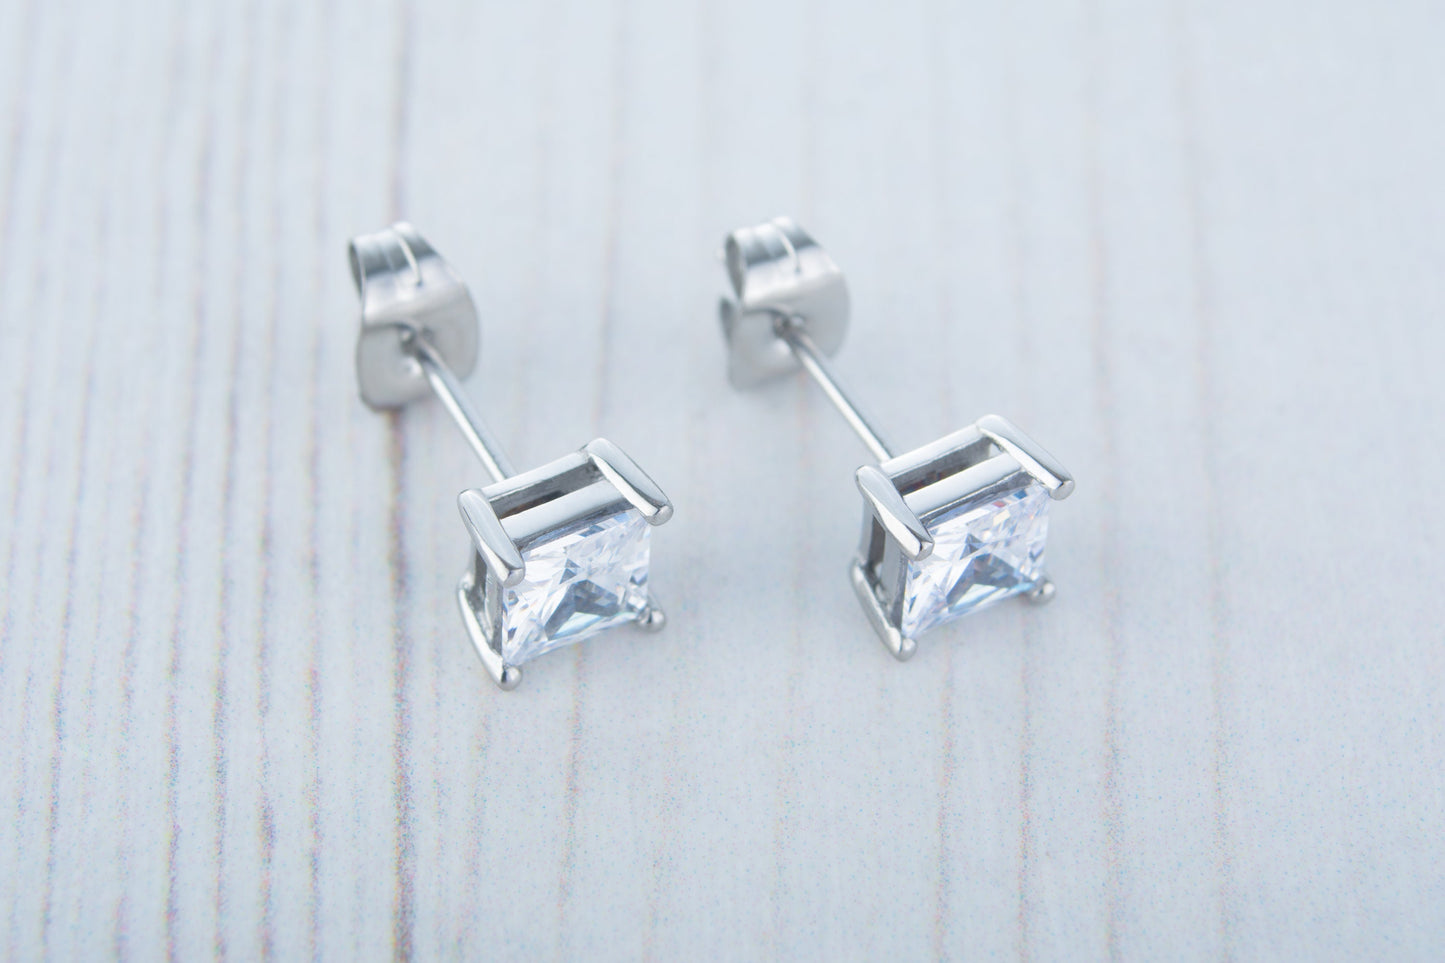 Man Made Diamond Simulant stud earrings, available in titanium, white gold and surgical steel 3mm, 4mm & 5mm sizes